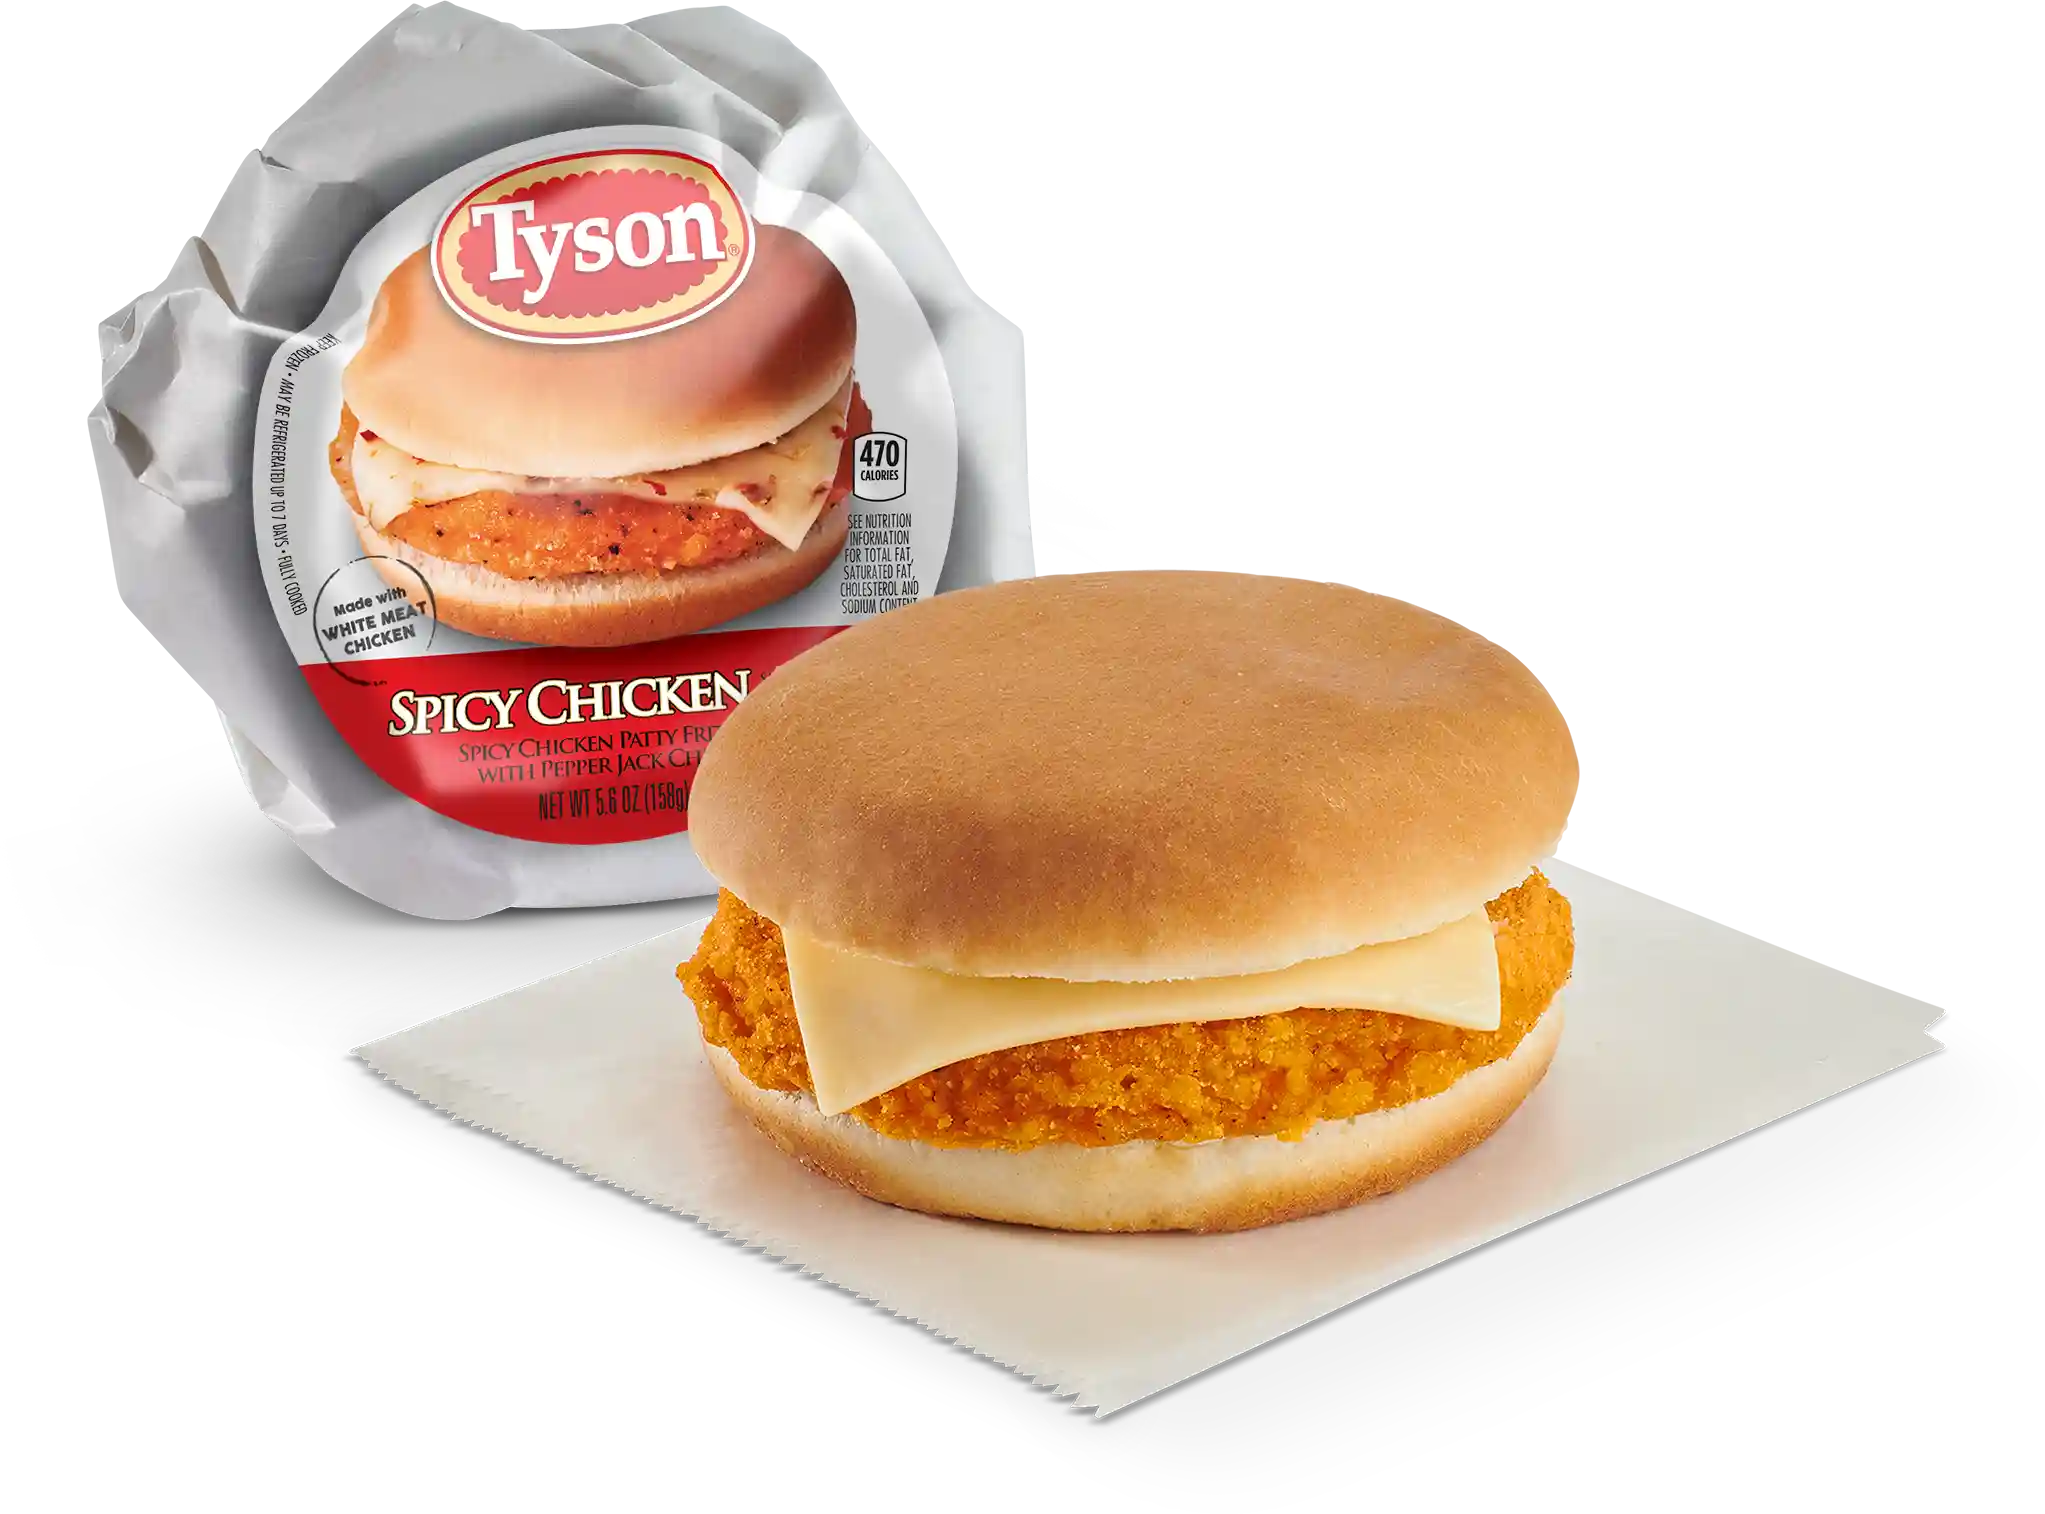 Tyson® Spicy Chicken Sandwich with Pepper Jack Cheese on a Bunhttps://images.salsify.com/image/upload/s--df28BnF7--/q_25/s8vxbipcibh0ckz1gkfd.webp